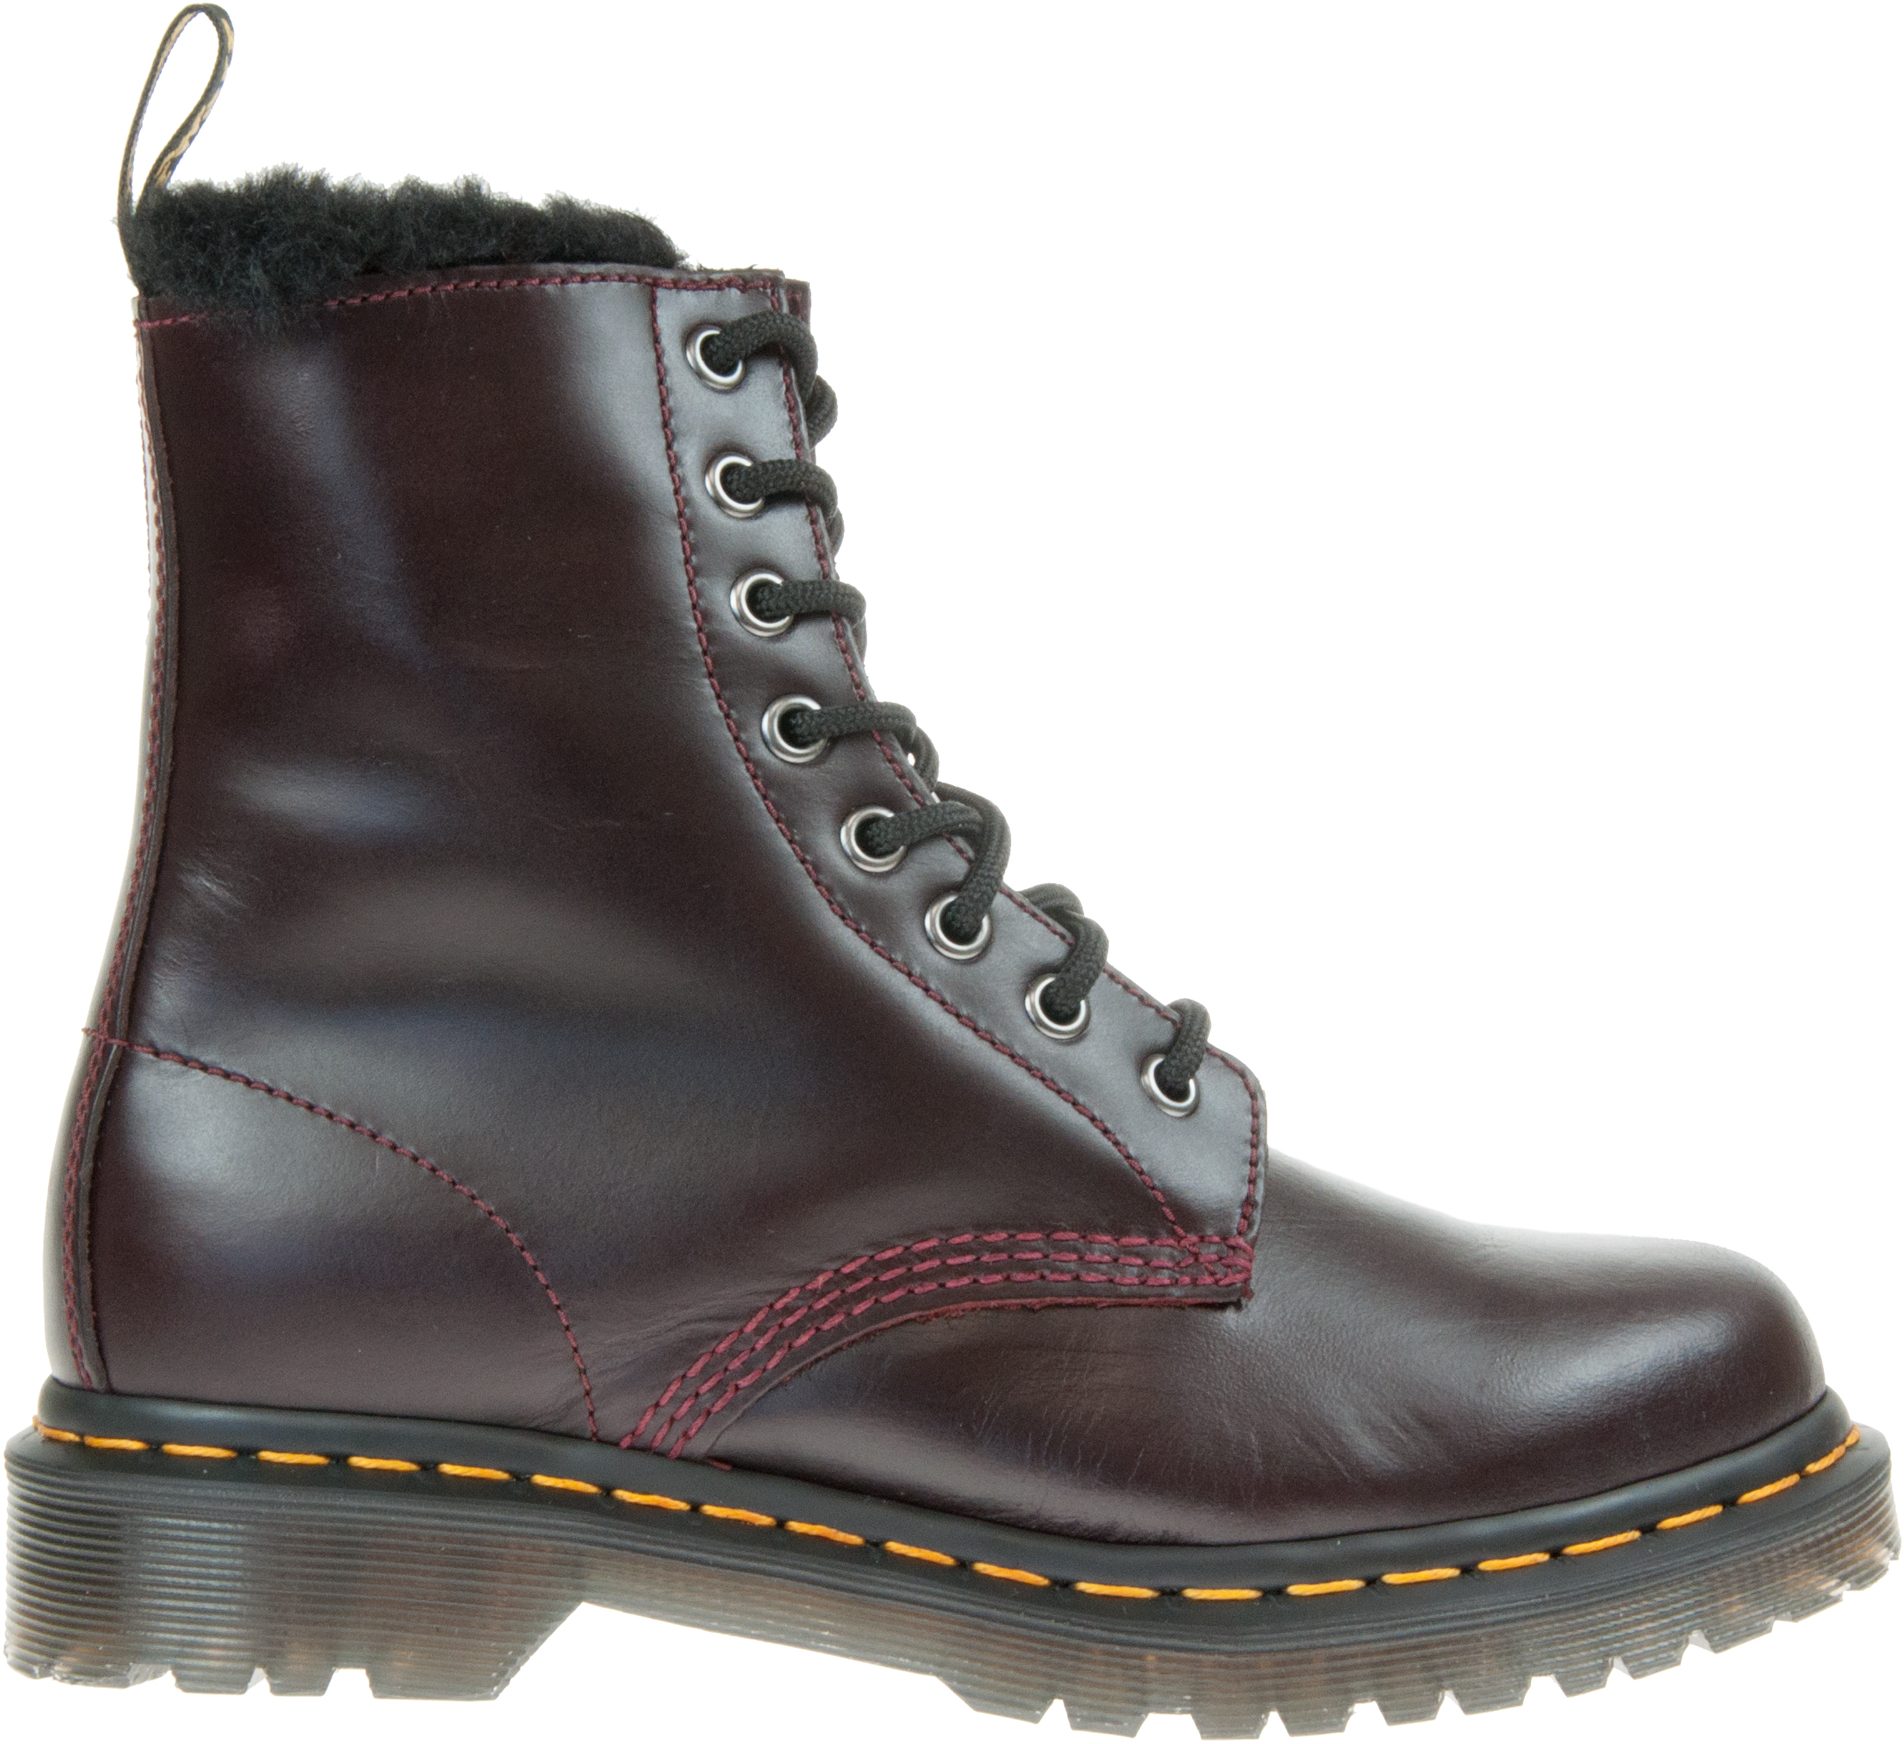 Dr. Martens 1460 Serena Fur Lined Oxblood Atlas 26238601 - Ankle Boots - Humphries Shoes